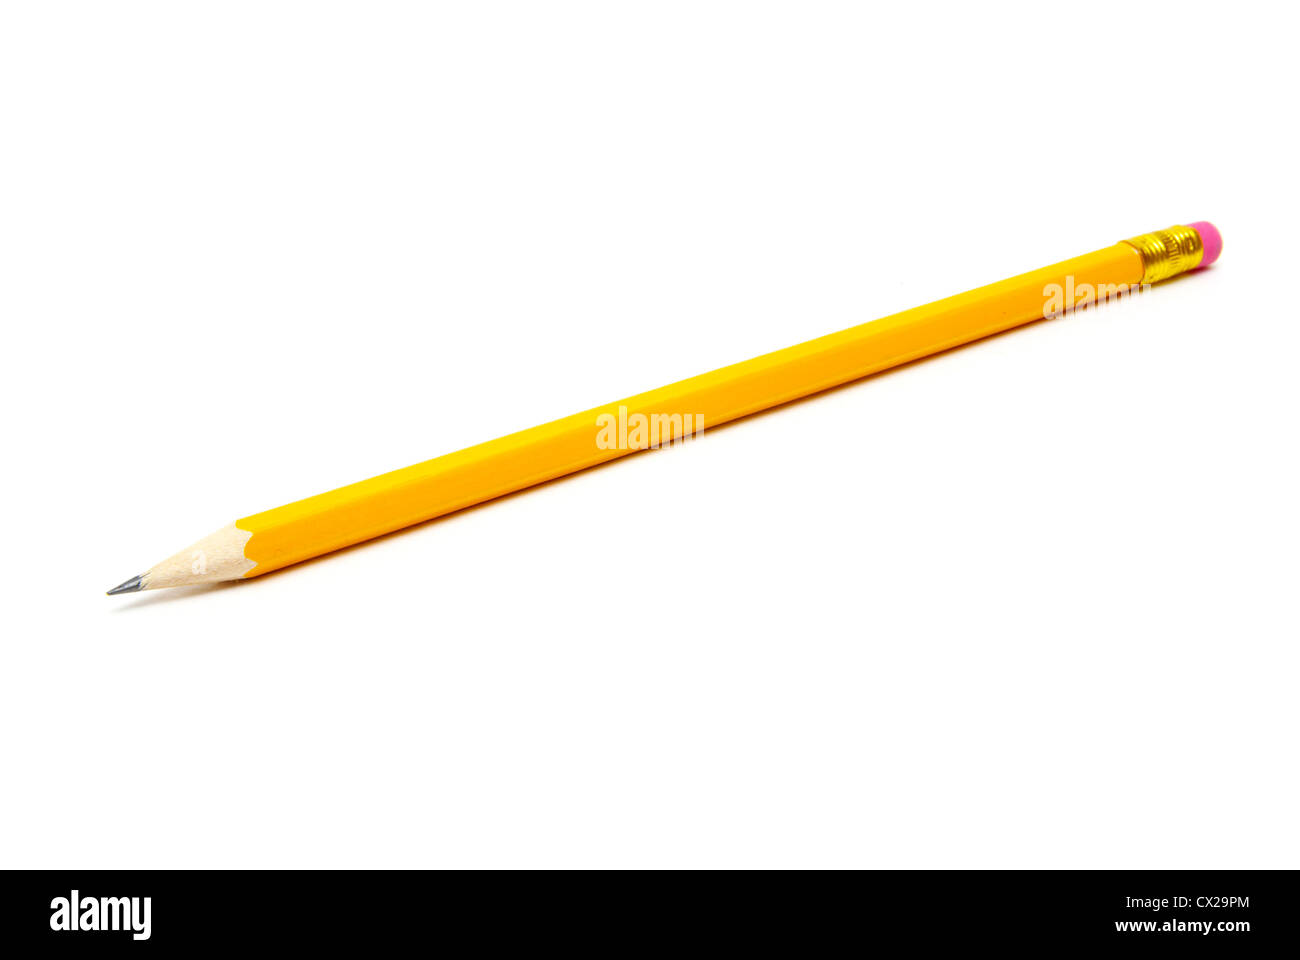 Pencil isolated on white background Stock Photo